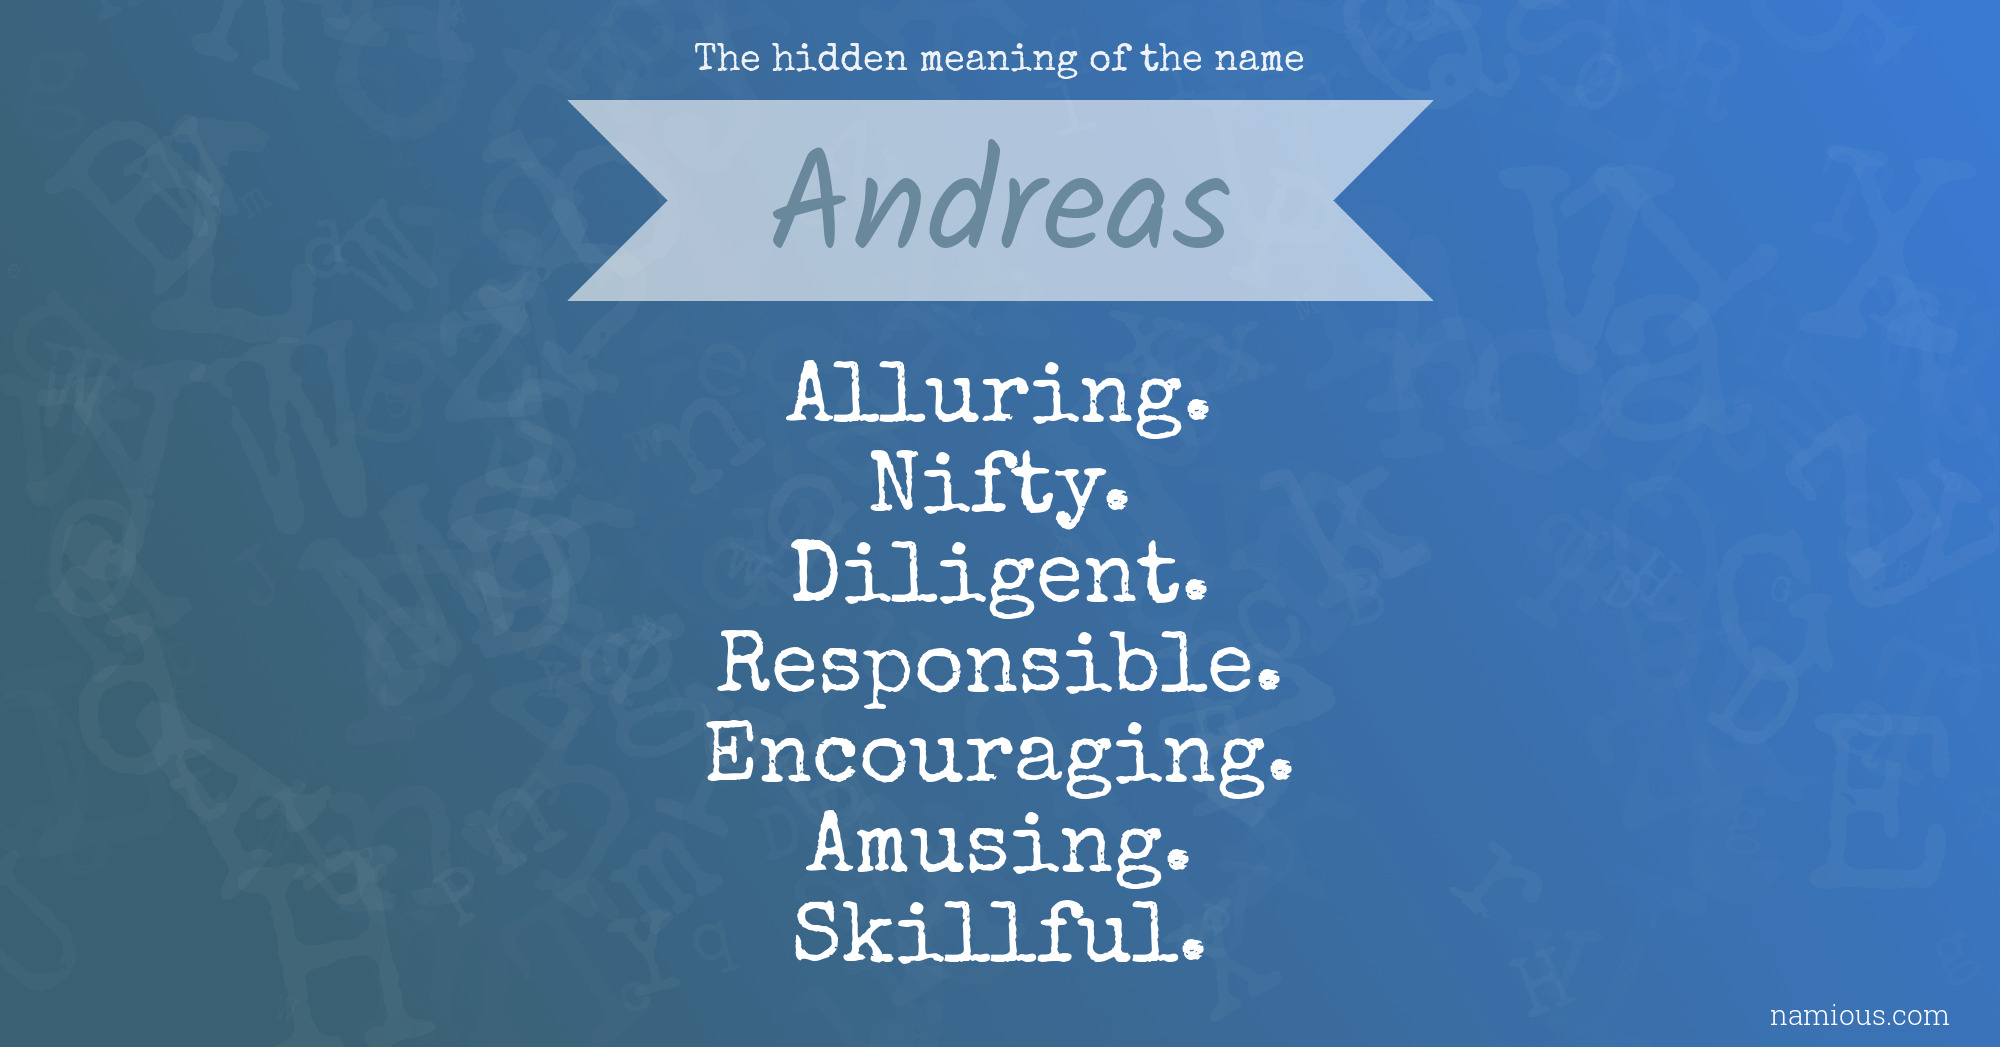 The hidden meaning of the name Andreas